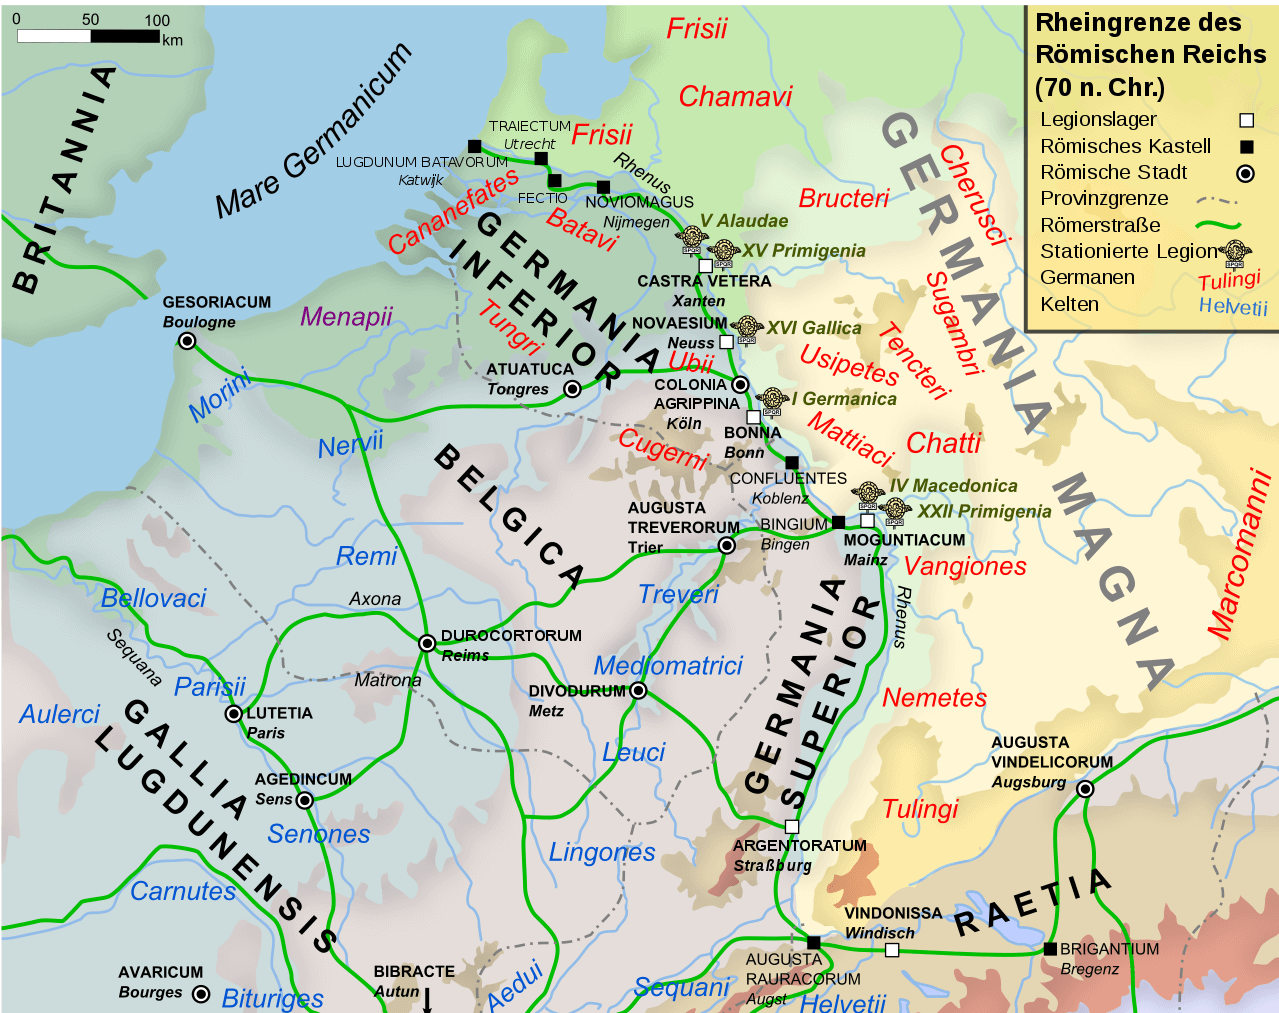 A map of the Rhine border of the Roman Empire around 70 A.D. With the names of native ethnic groups.